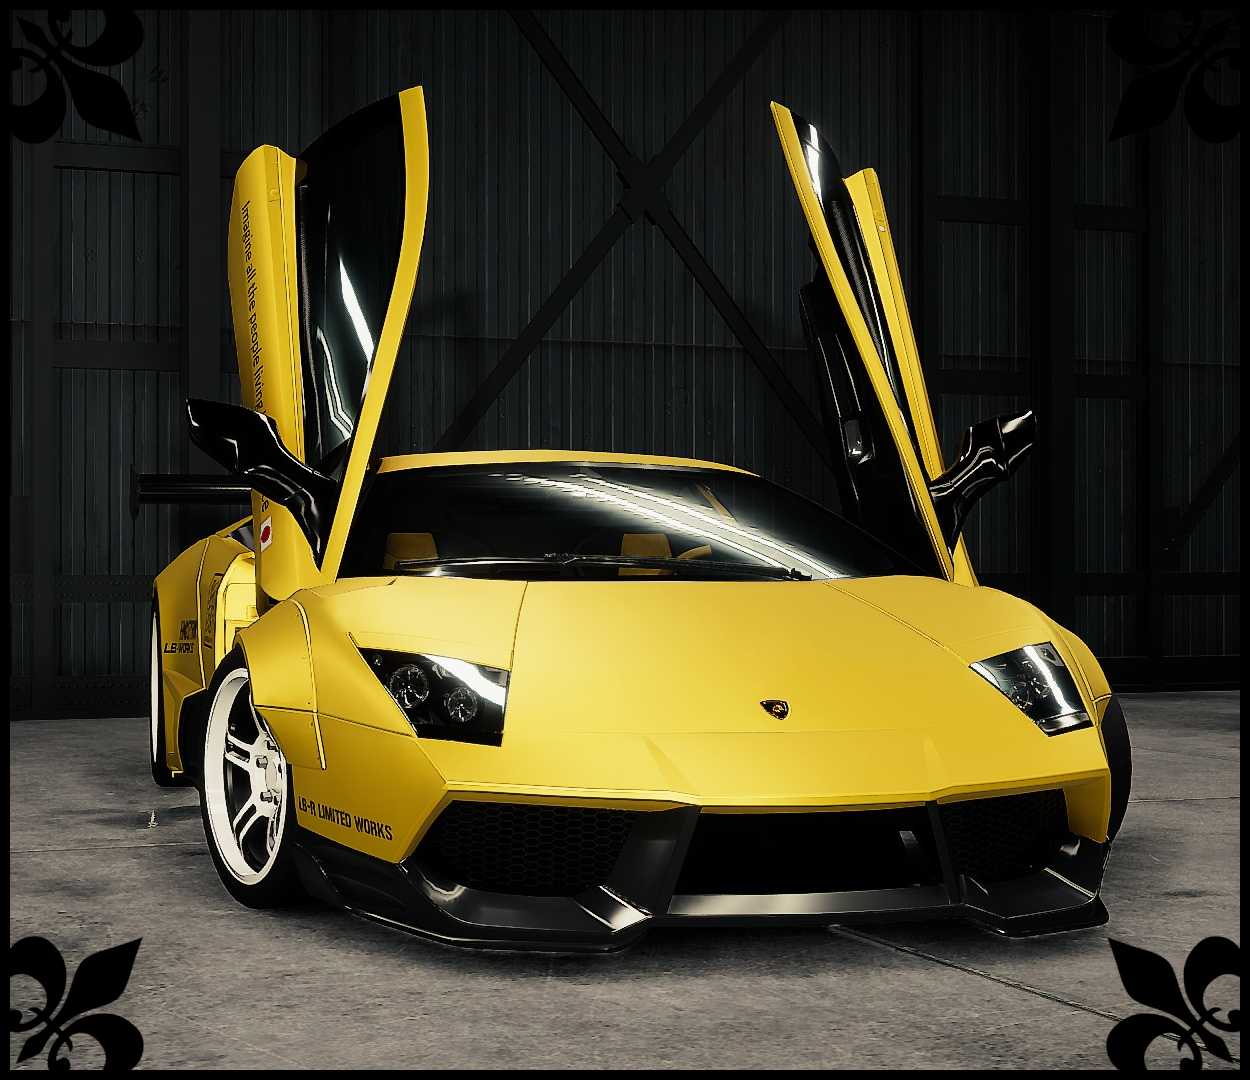 The Liberty Walk Lamborghini Murcielago in a matt version of the classic  Lambo yellow, black and white accents across the car carried into the  engine and suspension really make this car pop.